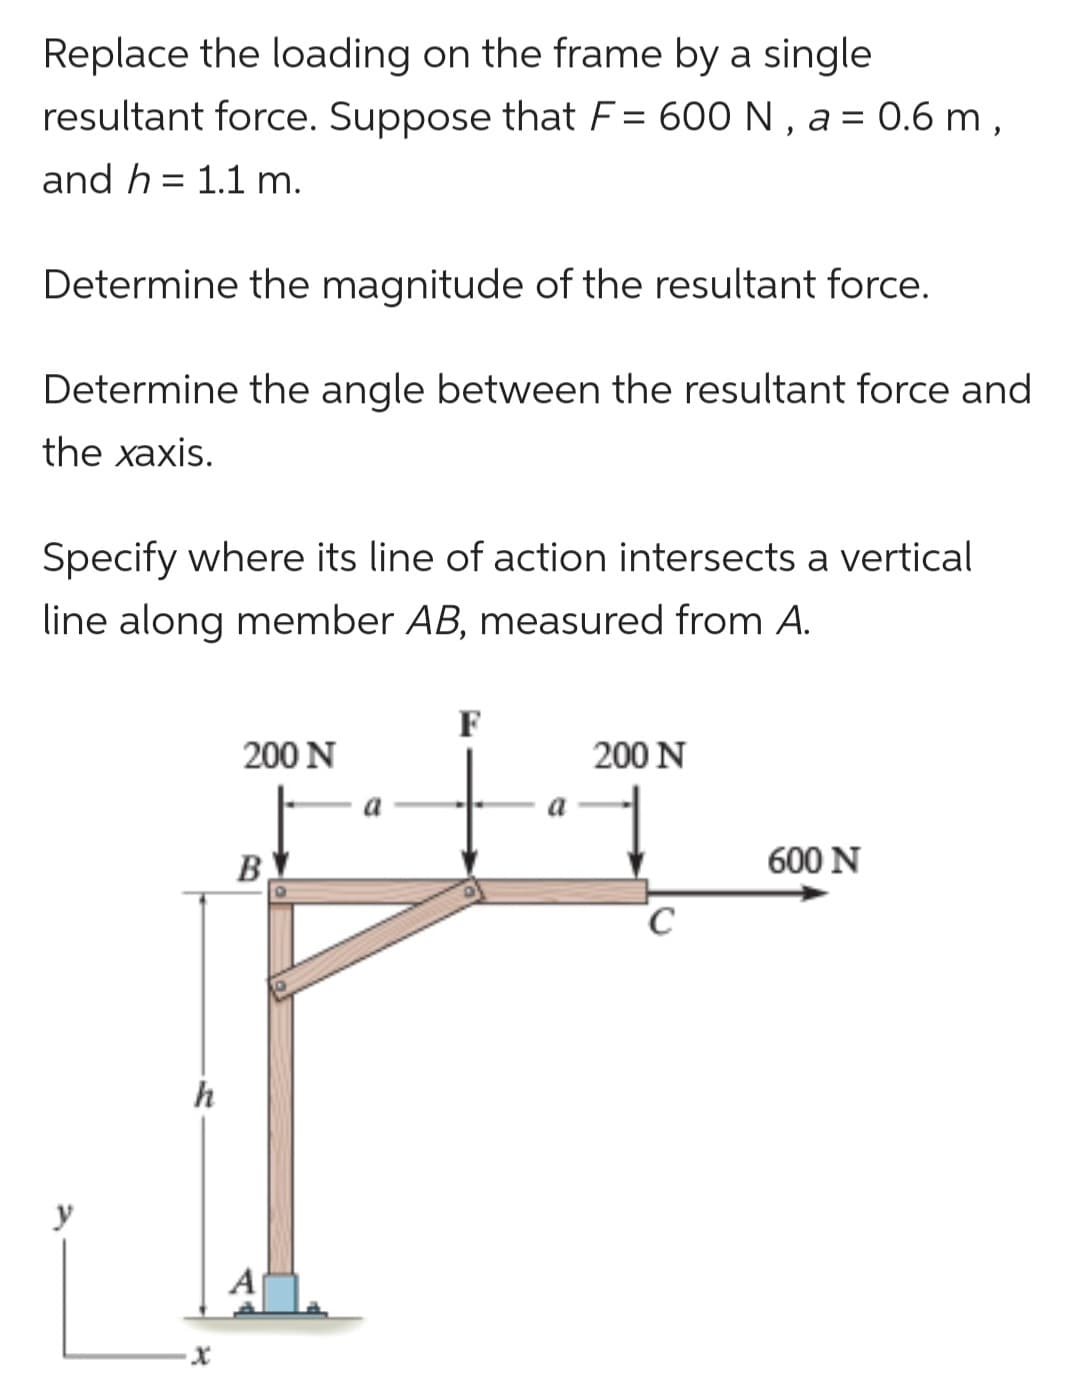 Replace the loading on the frame by a single
resultant force. Suppose that F = 600 N, a = 0.6 m,
and h = 1.1 m.
Determine the magnitude of the resultant force.
Determine the angle between the resultant force and
the xaxis.
Specify where its line of action intersects a vertical
line along member AB, measured from A.
h
200 N
B
a
a
200 N
C
600 N